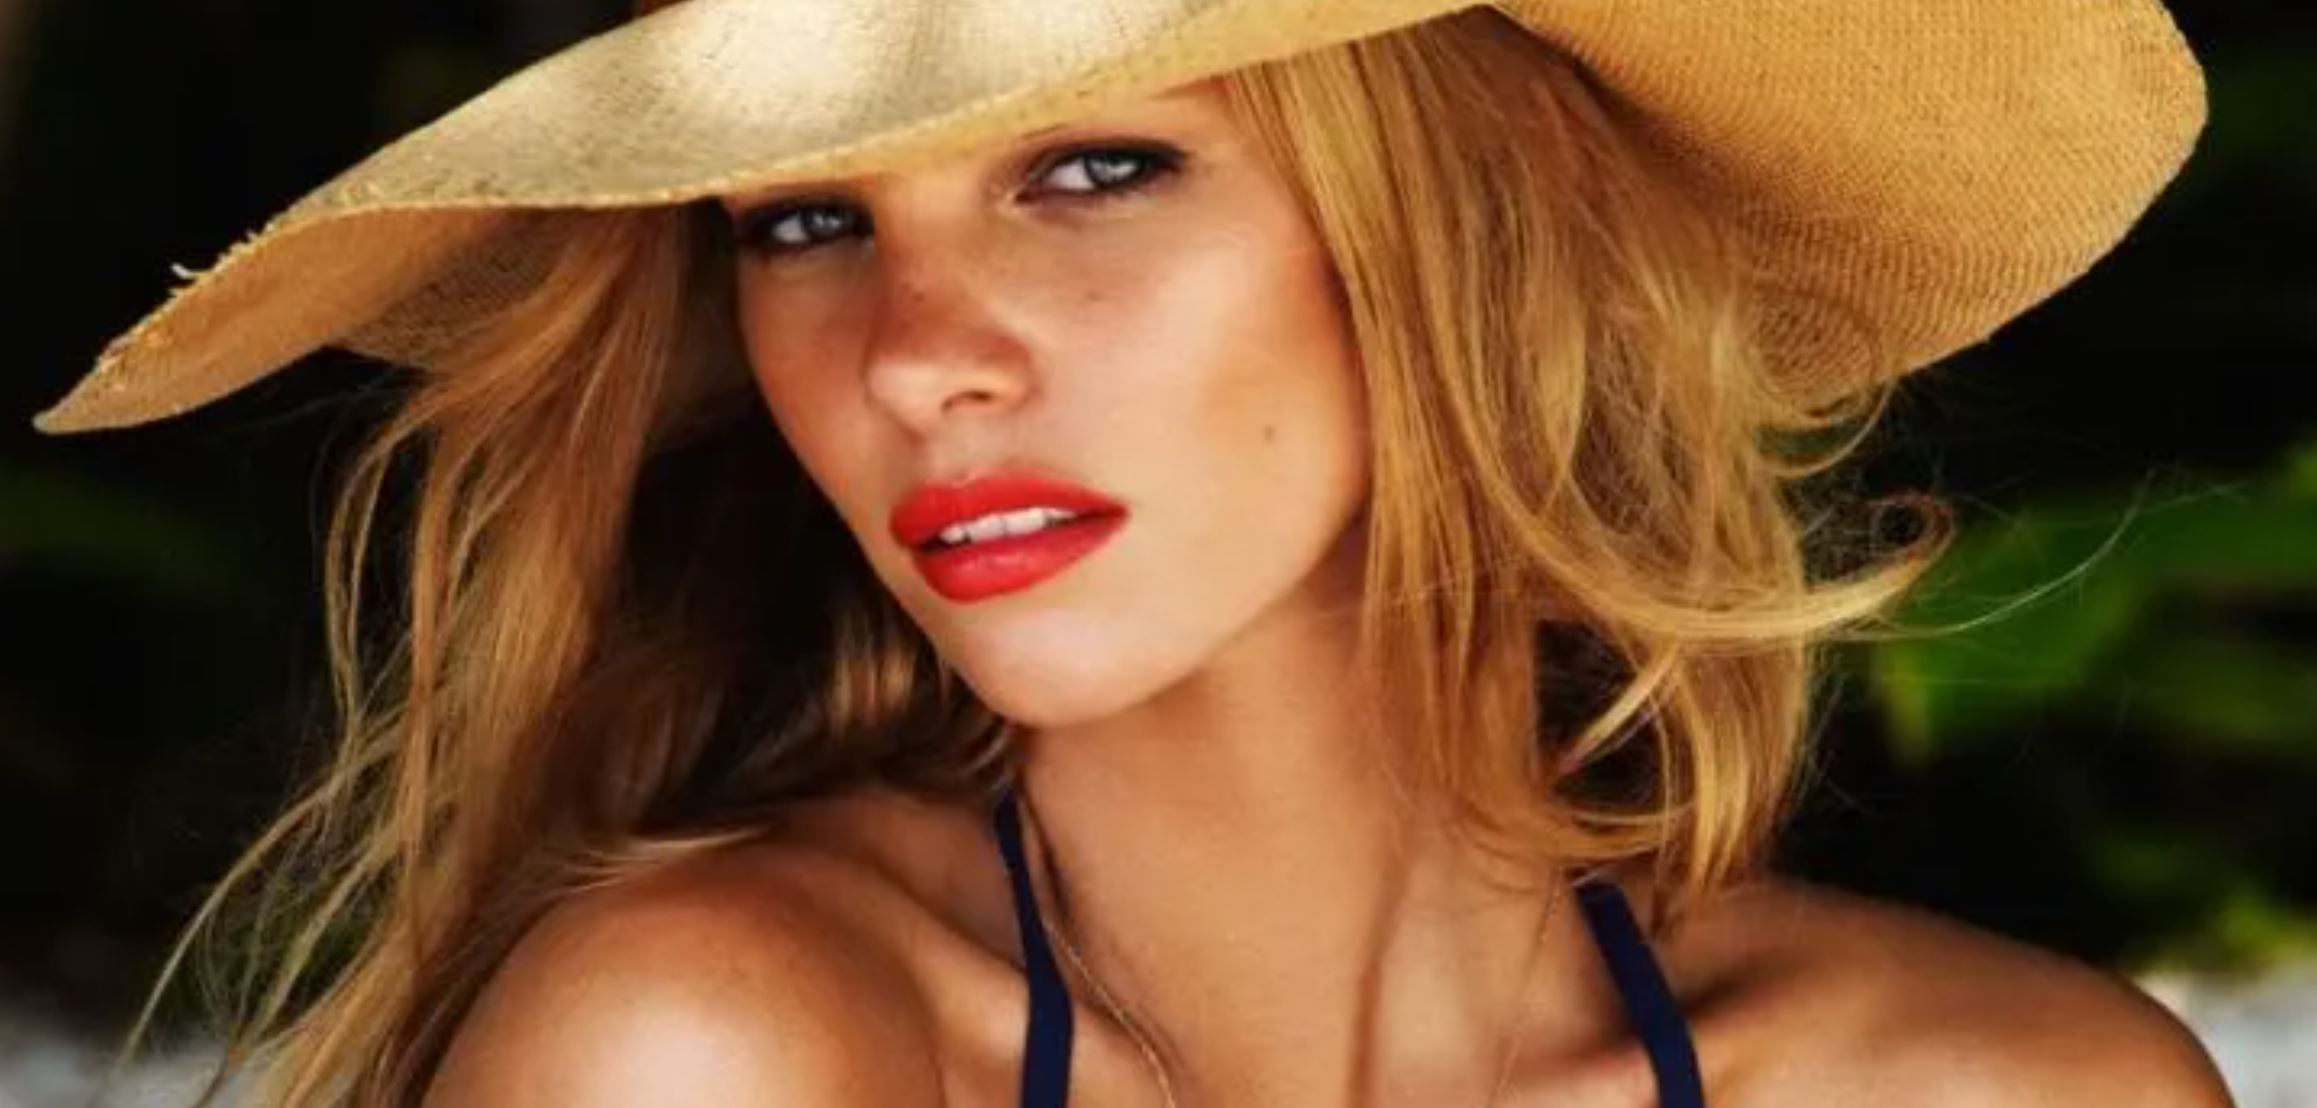 A woman wearing red lipstick, a bikini and wide brimmed hat